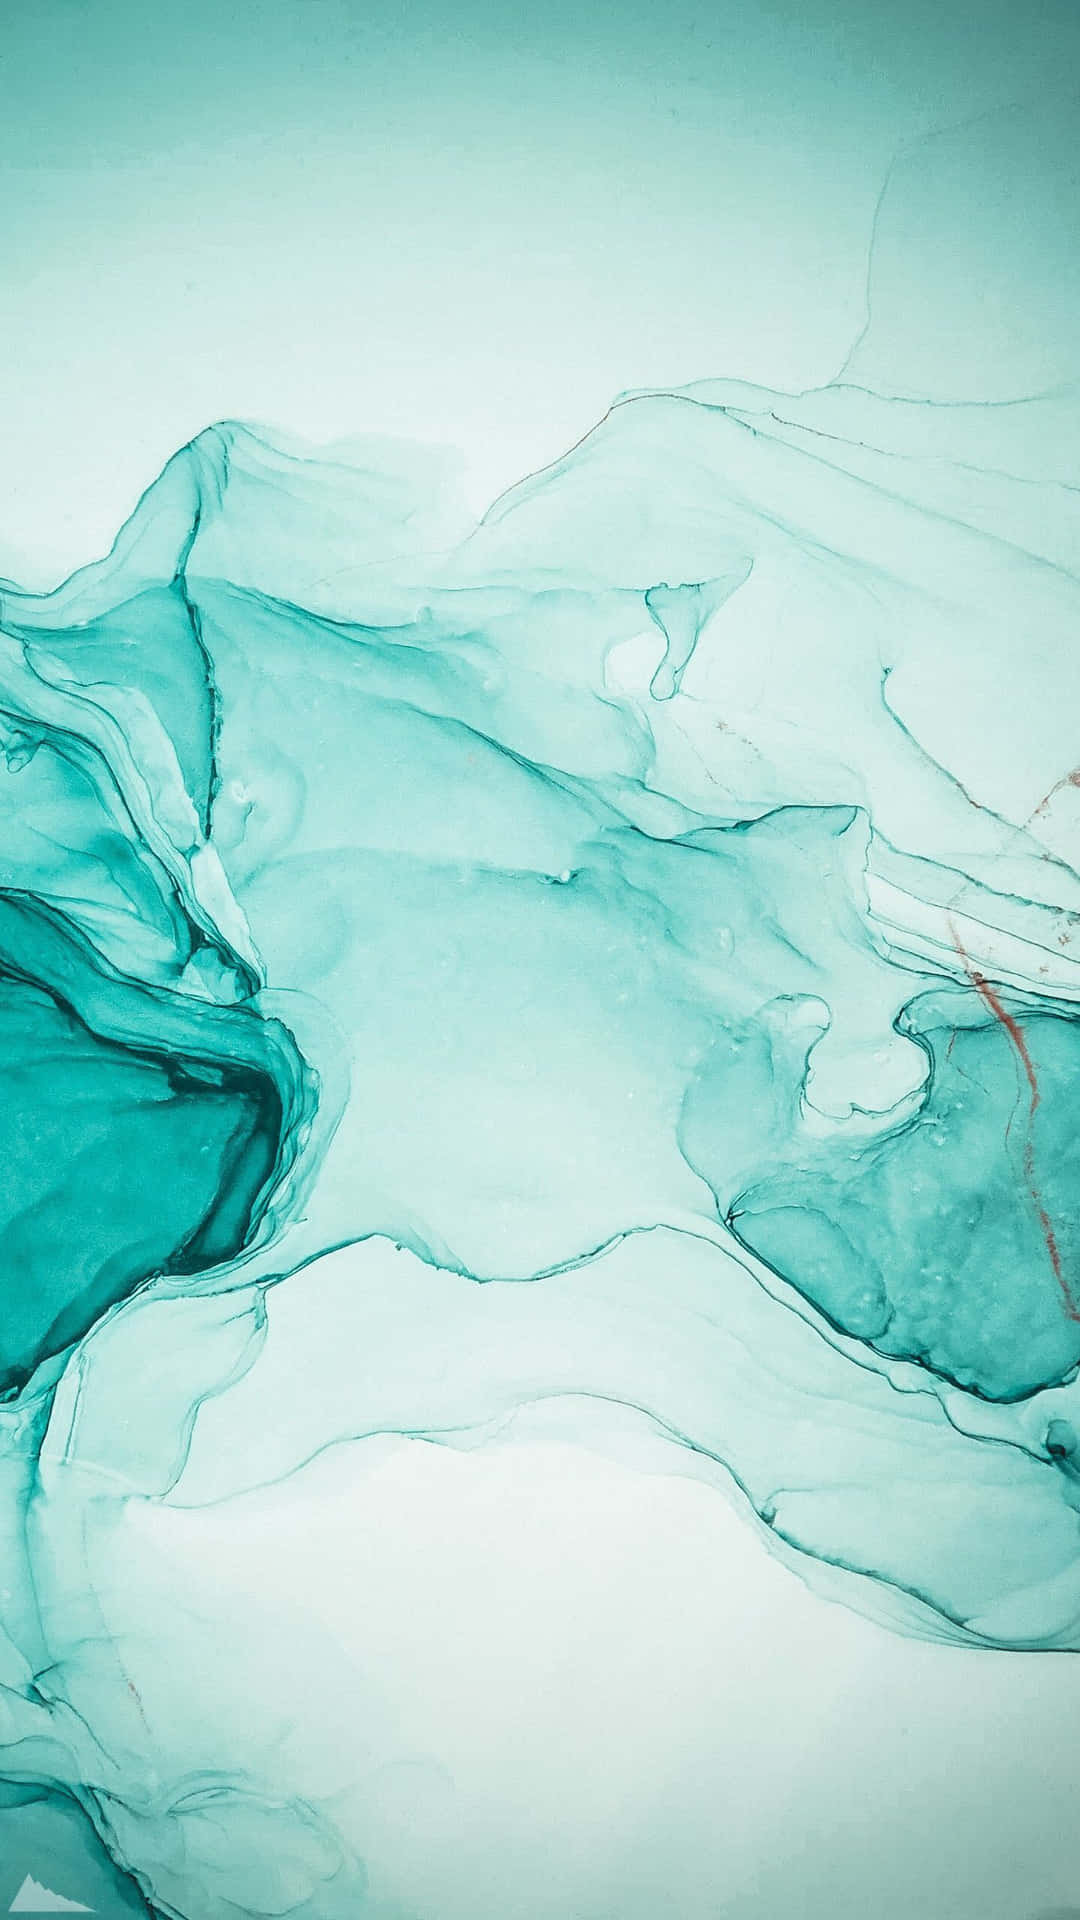 “The Beauty of Teal Marble” Wallpaper